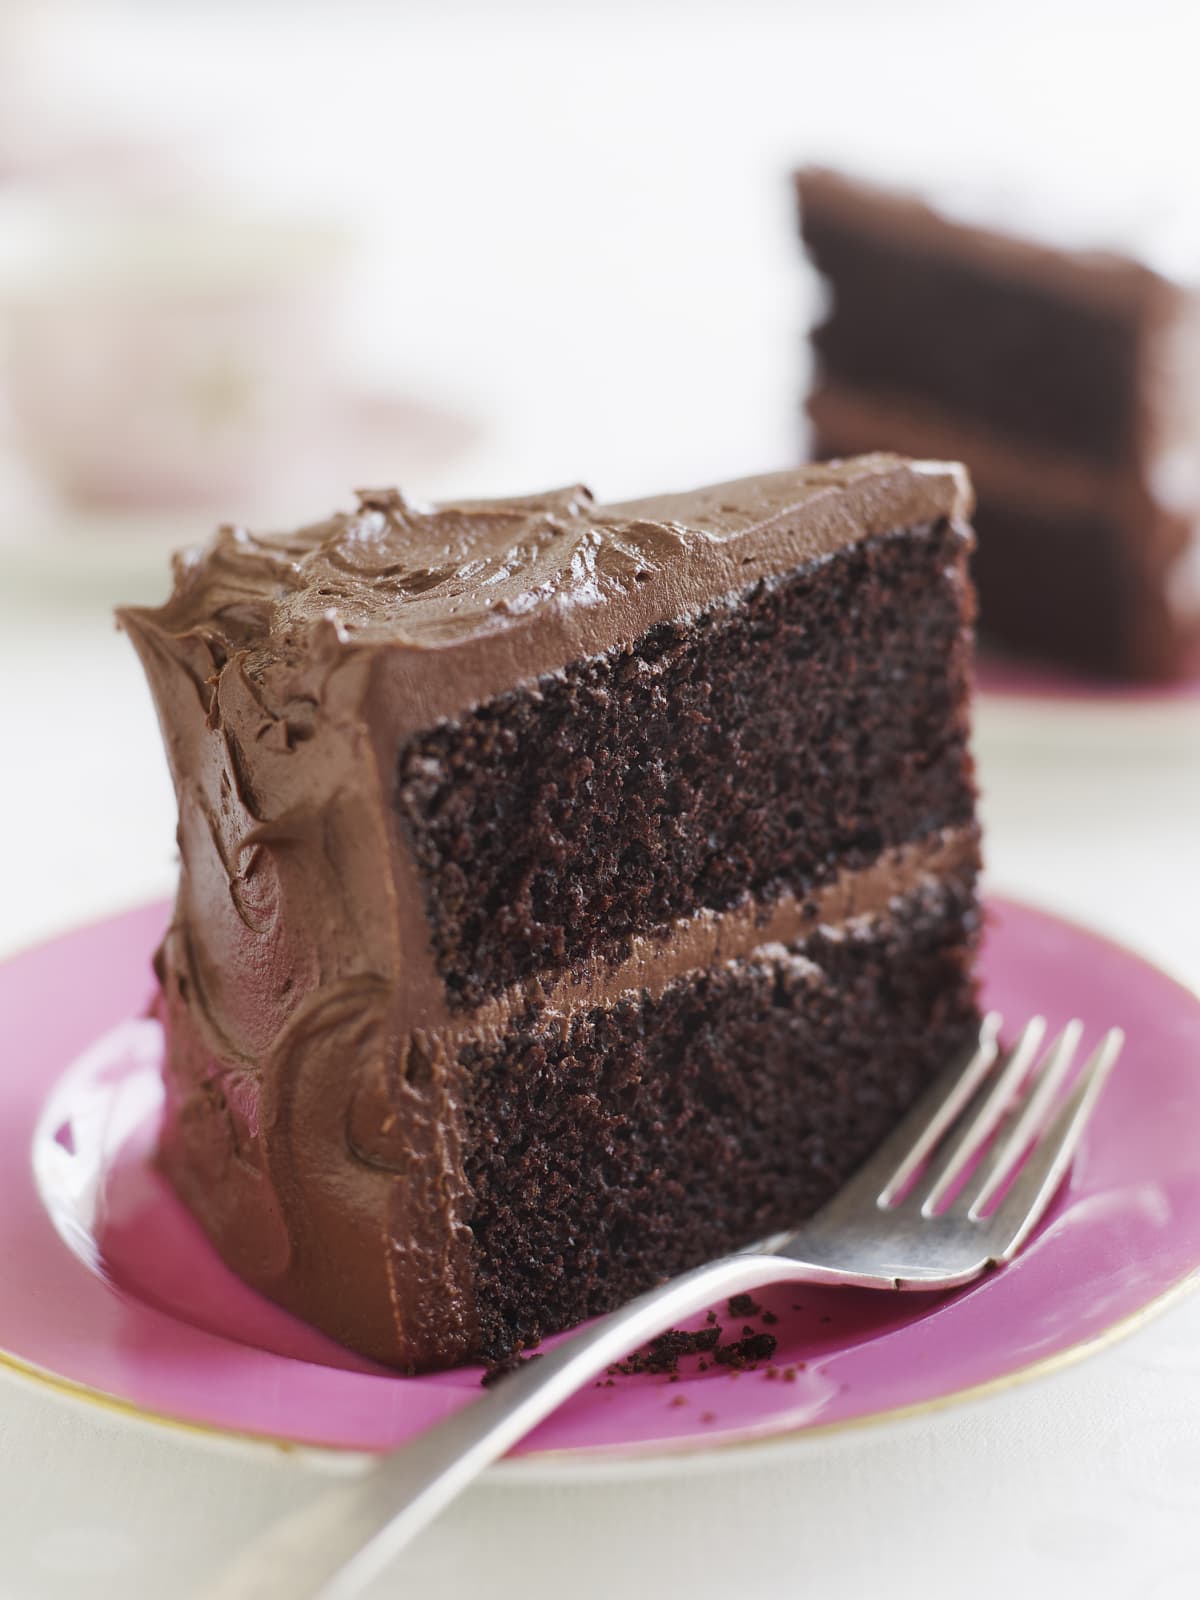 Adding frosting to chocolate cake